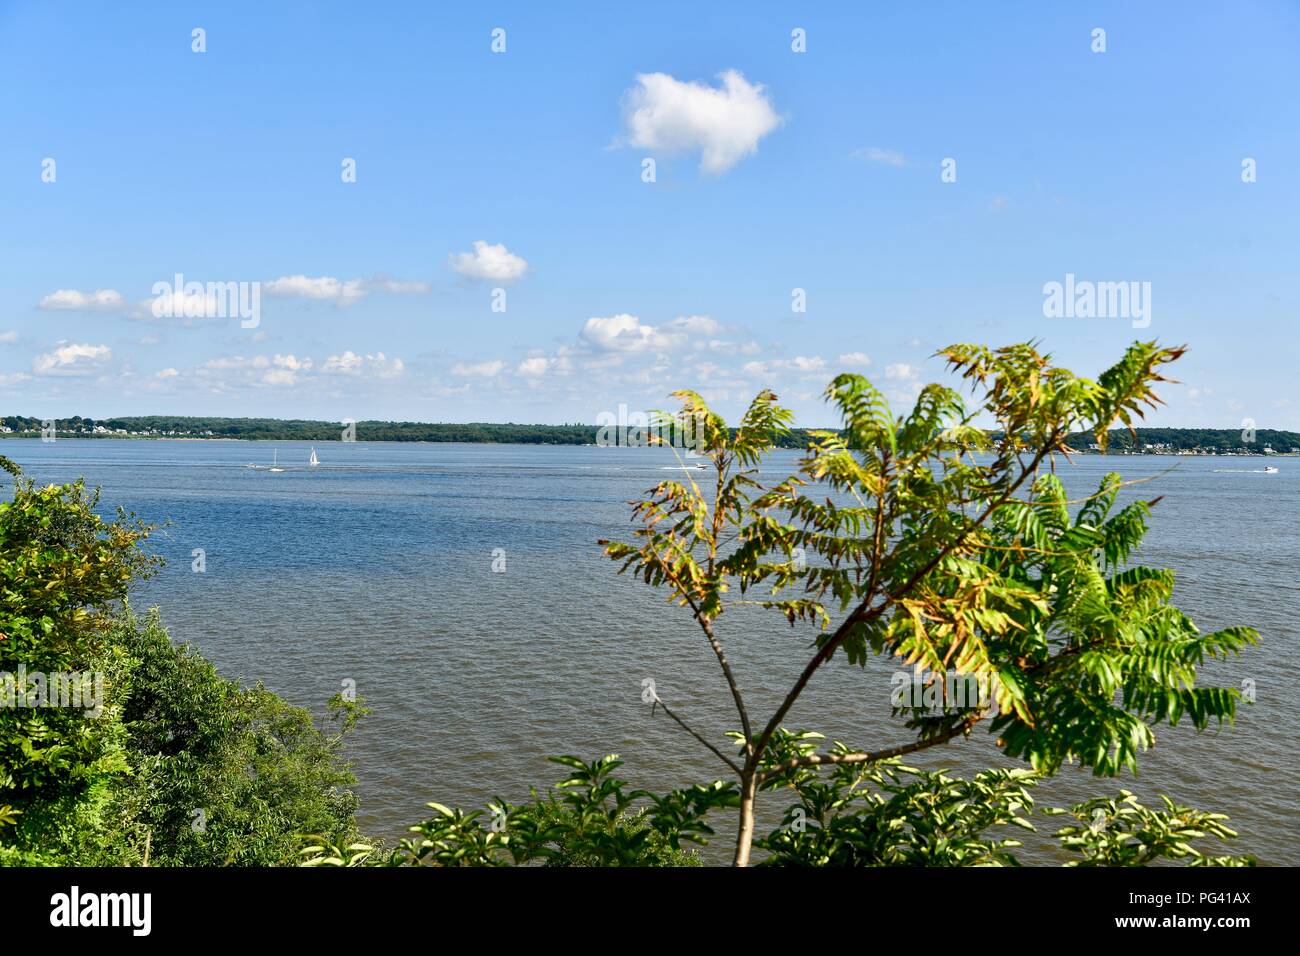 Northern tip of the Chesapeake bay viewed from Elk Neck state park, MD, USA Stock Photo